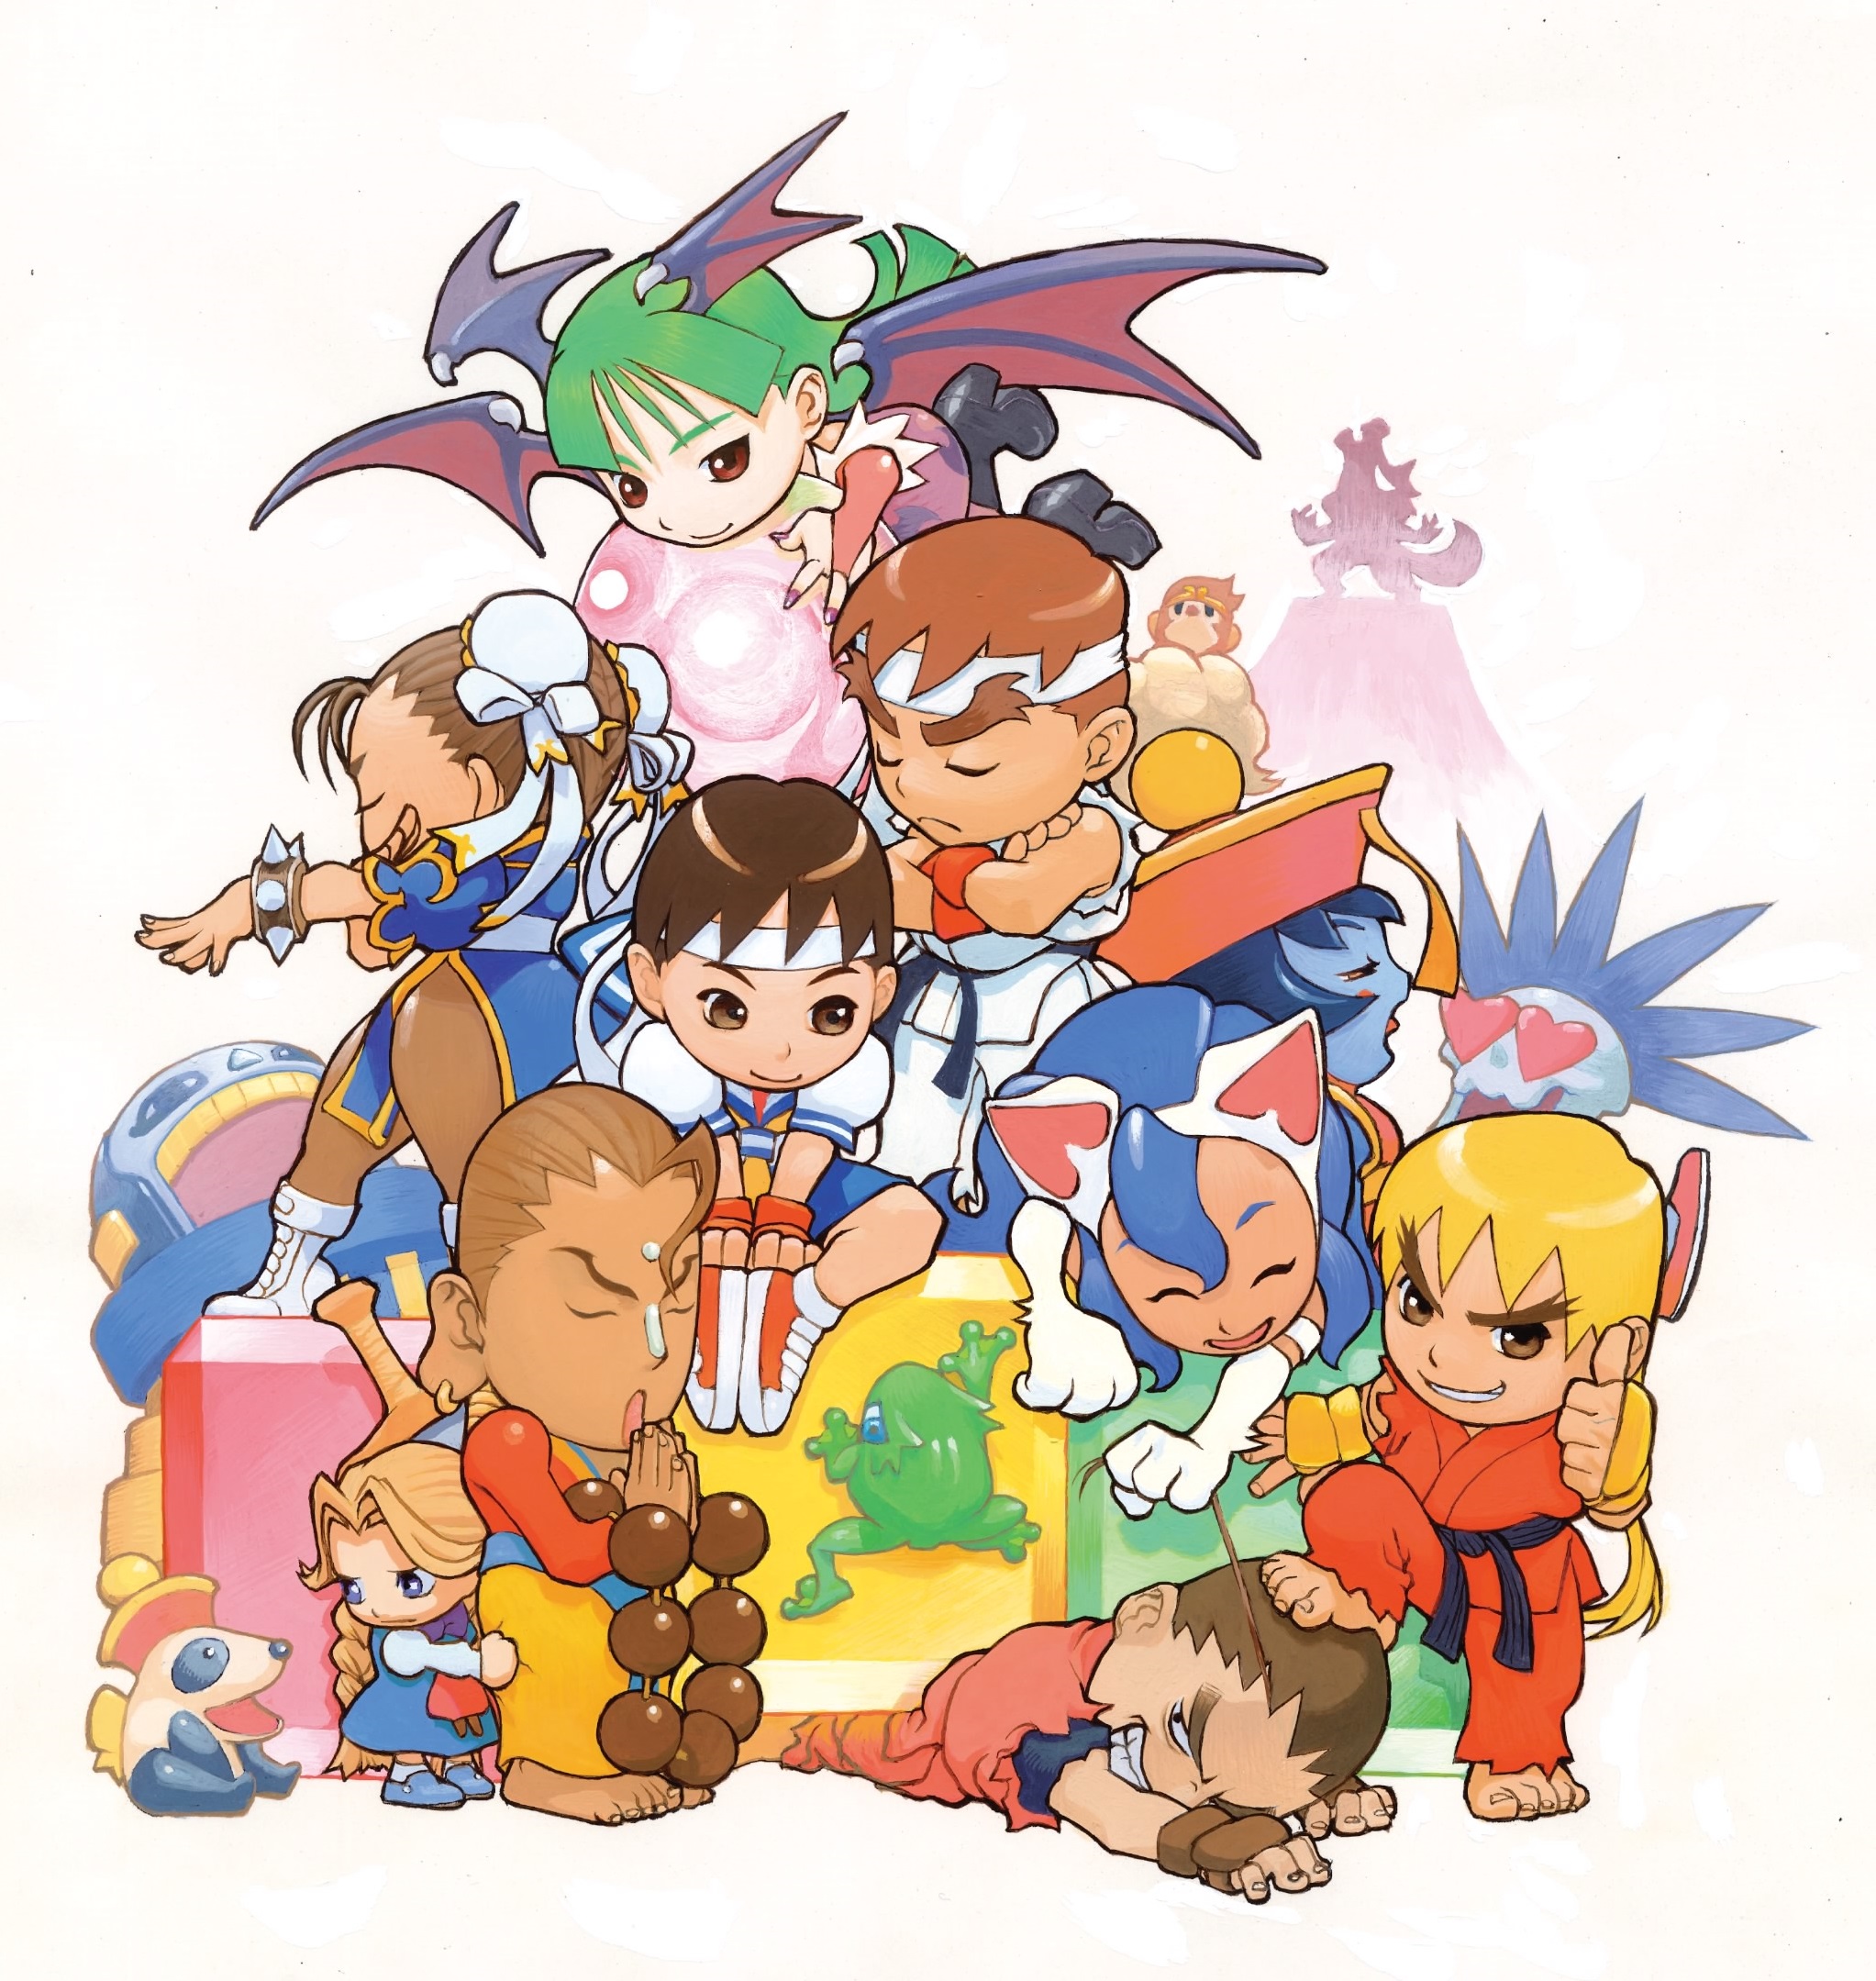 Neat Puzzle Fighter II – art from SF6